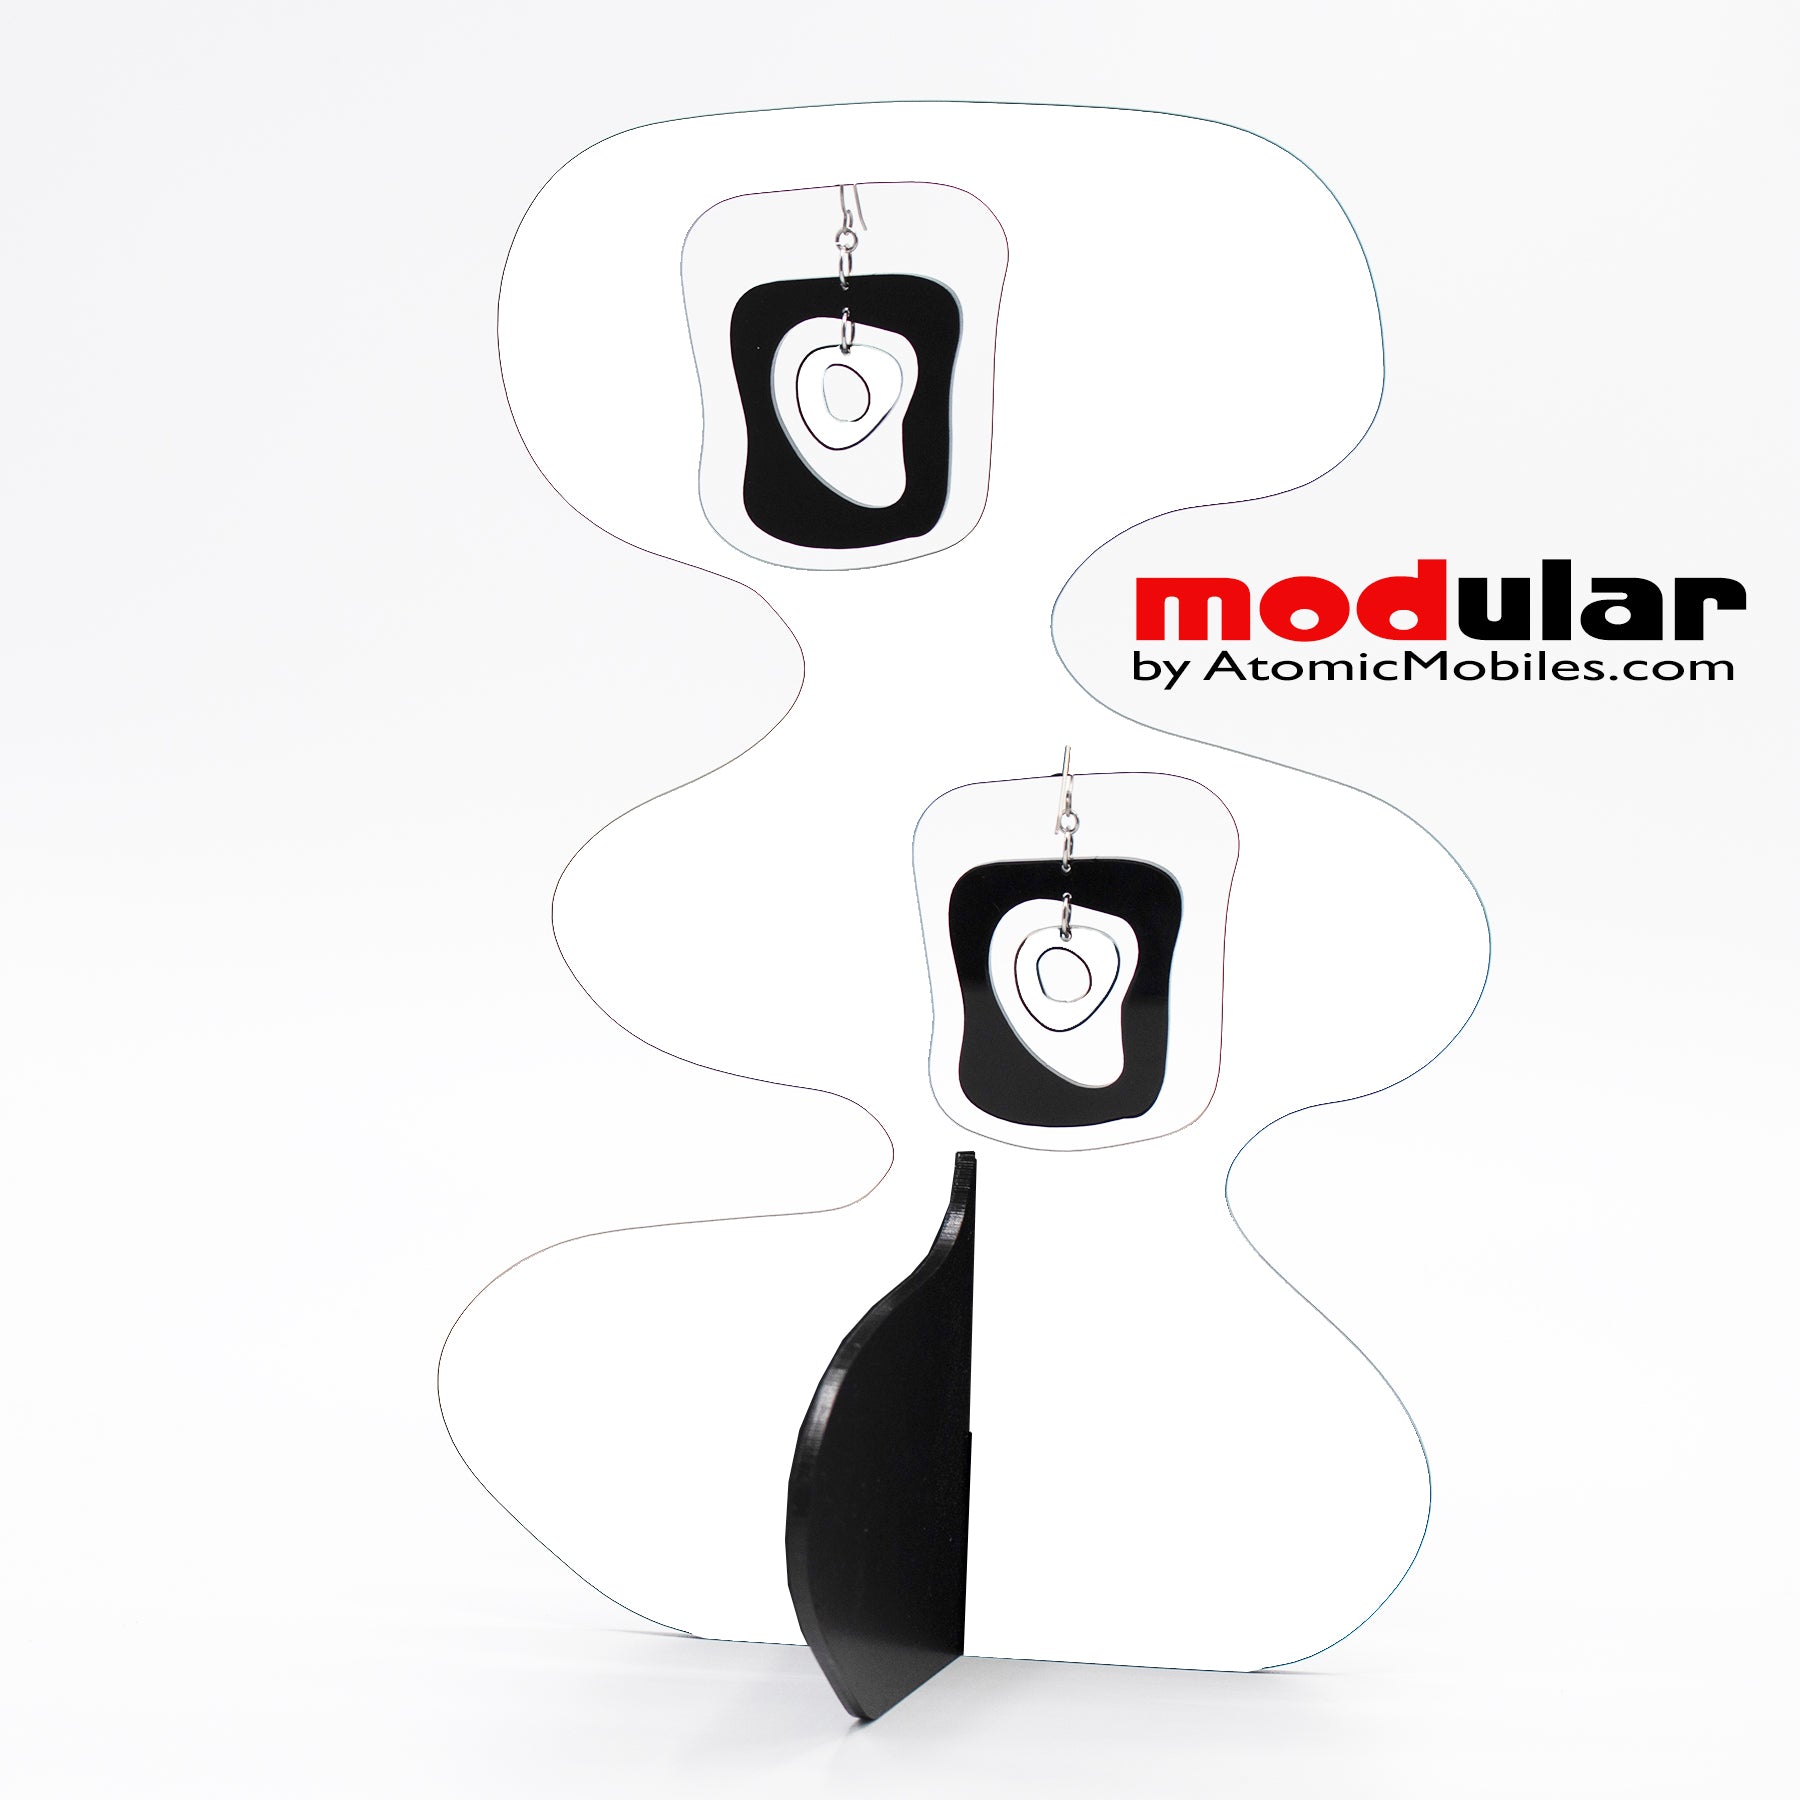 Handmade Mid Mod retro midcentury style earrings and stabile kinetic modern art sculpture in White and Black by AtomicMobiles.com